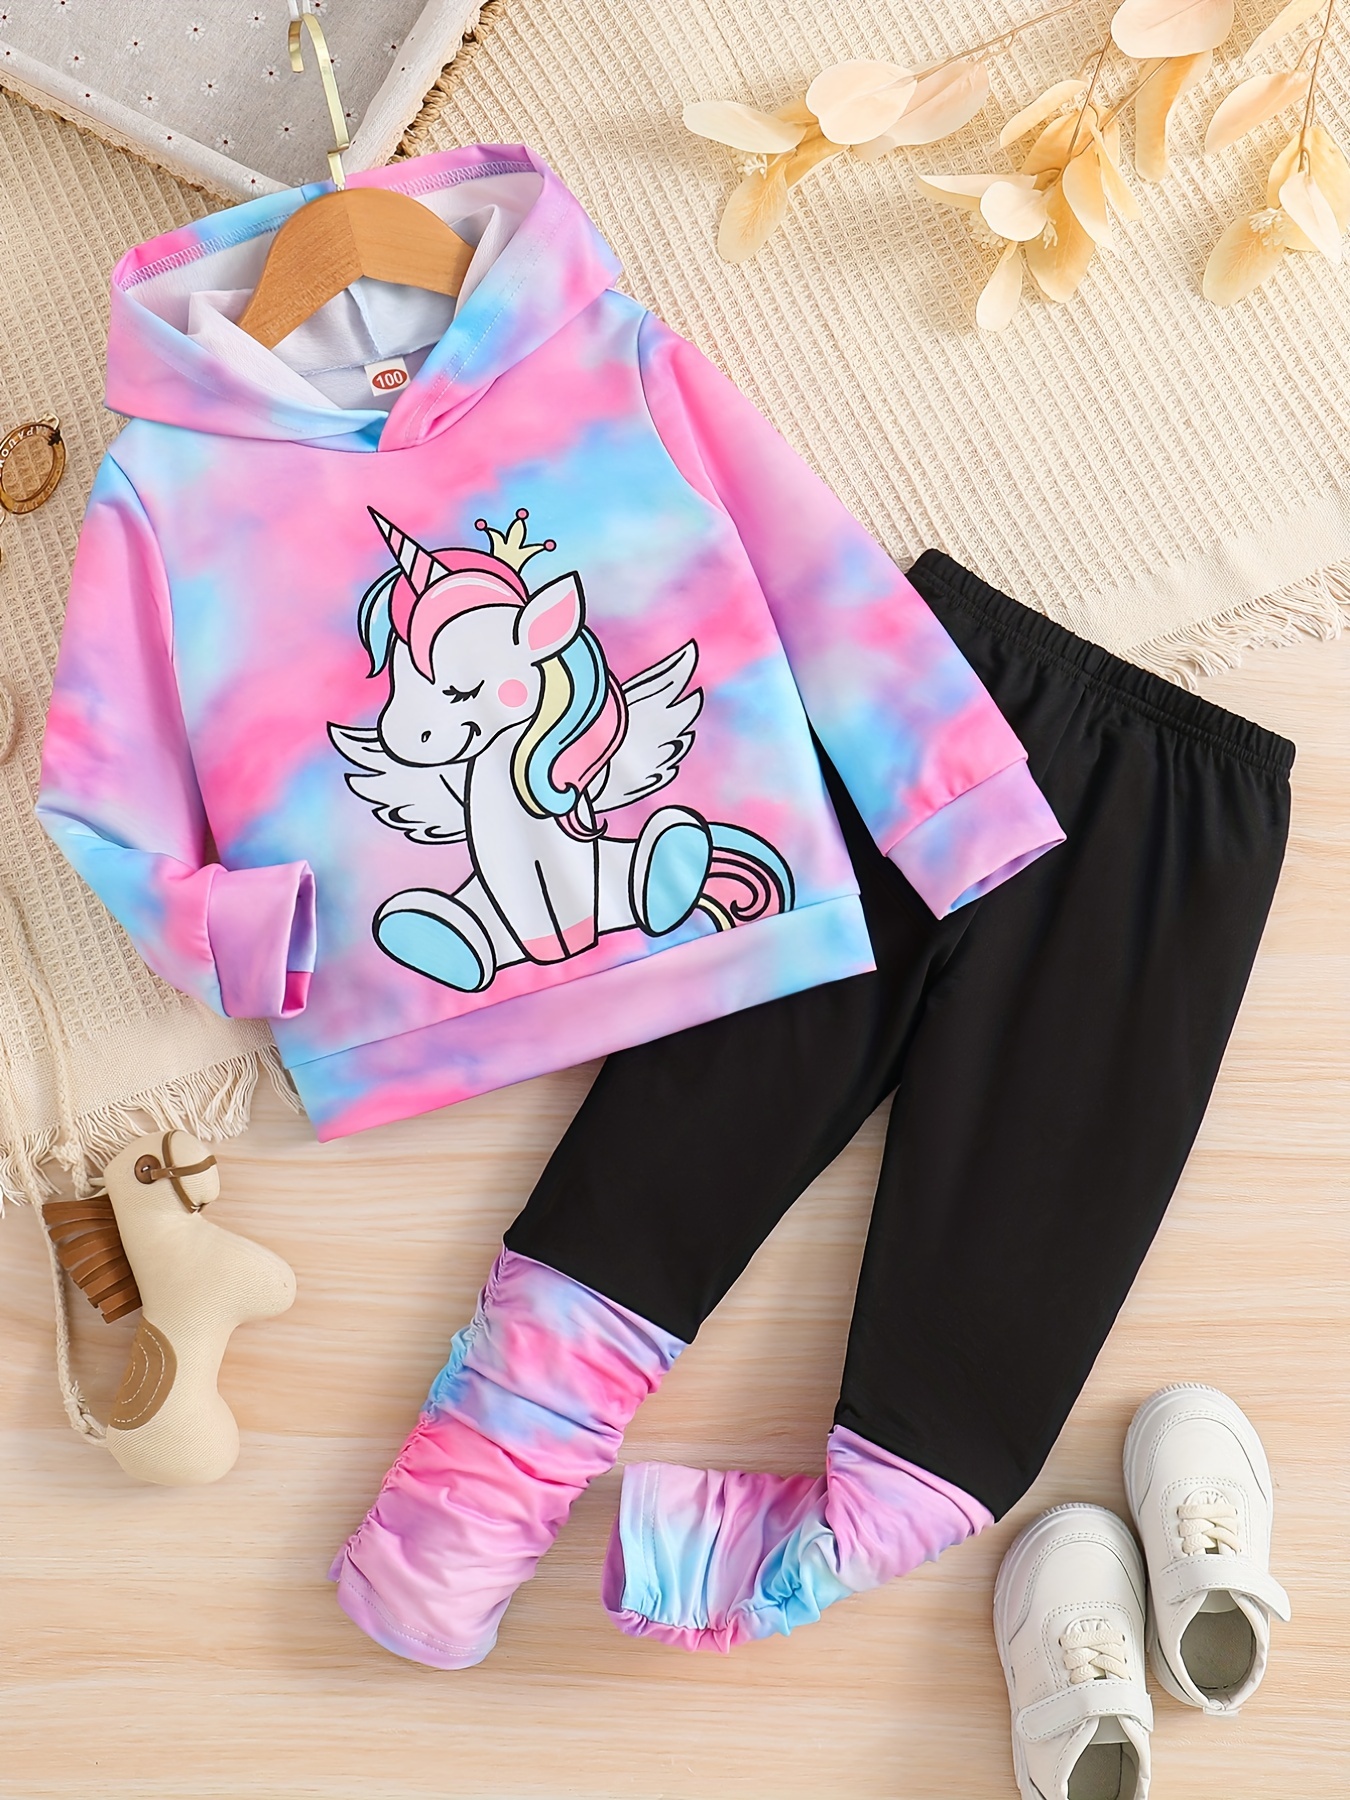 SHEIN Young Girl Rainbow Print White Casual Hoodie And Pants Set For  Outdoor Activities, Sports, And Vacation In Autumn/winter. The Set Includes  A Hooded Sweatshirt With Cuffs And A Pink Digital Unicorn